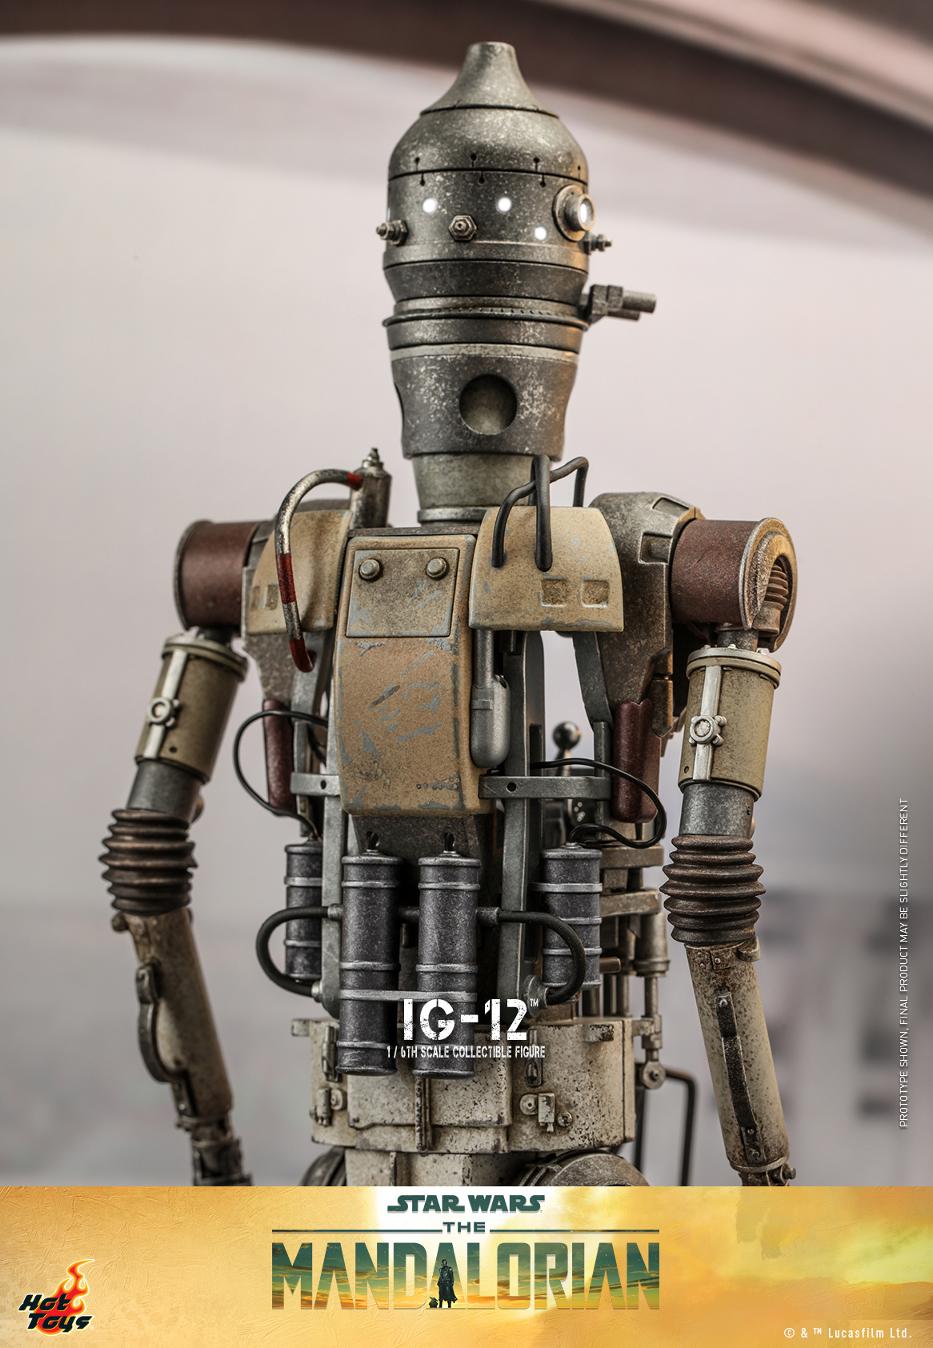 Star Wars: The Mandalorian - 1/6th scale IG-12 Collectible Figure - Hot Toy Ig-12_19